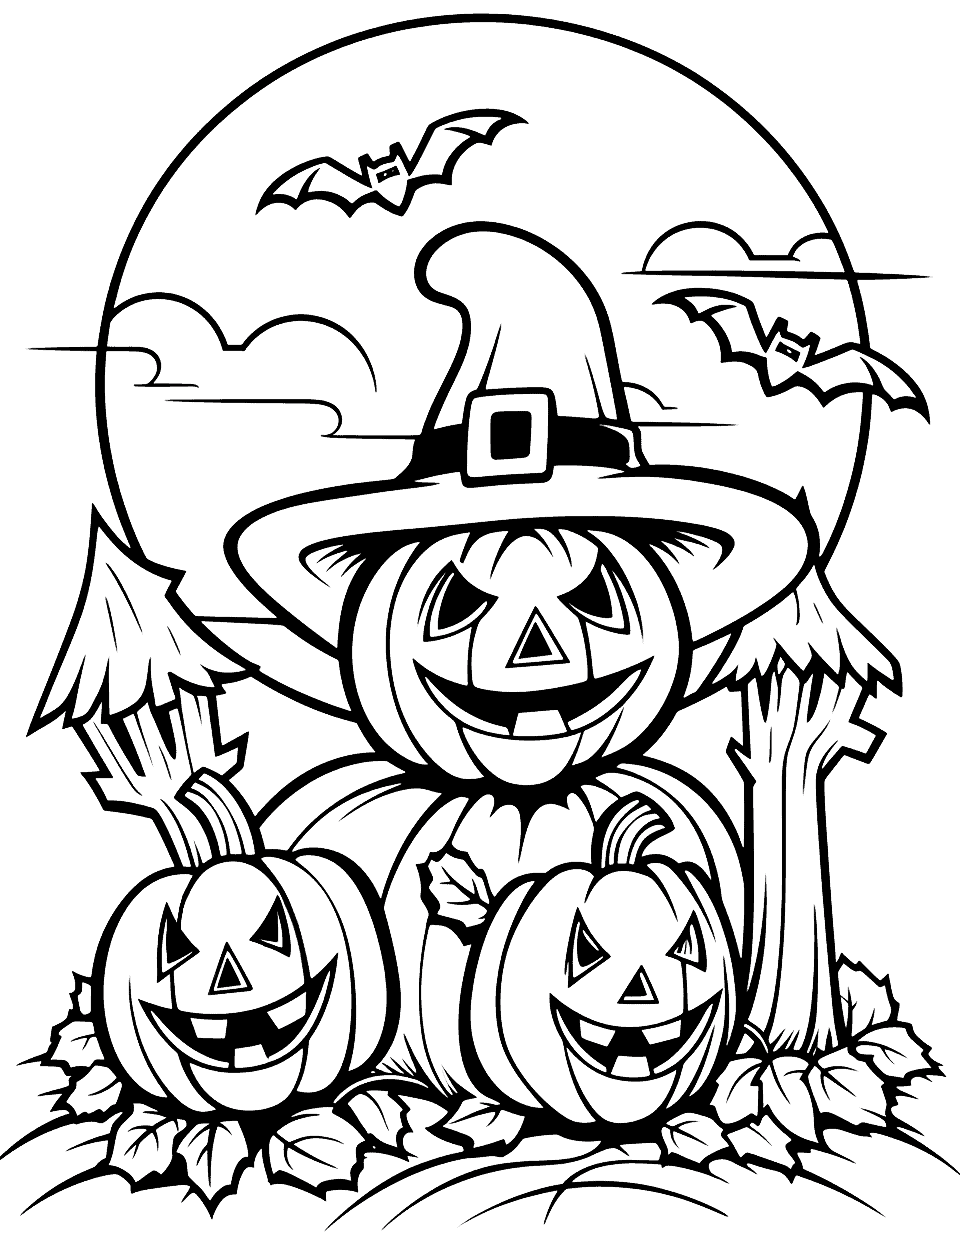 Halloween coloring pages free printable sheets